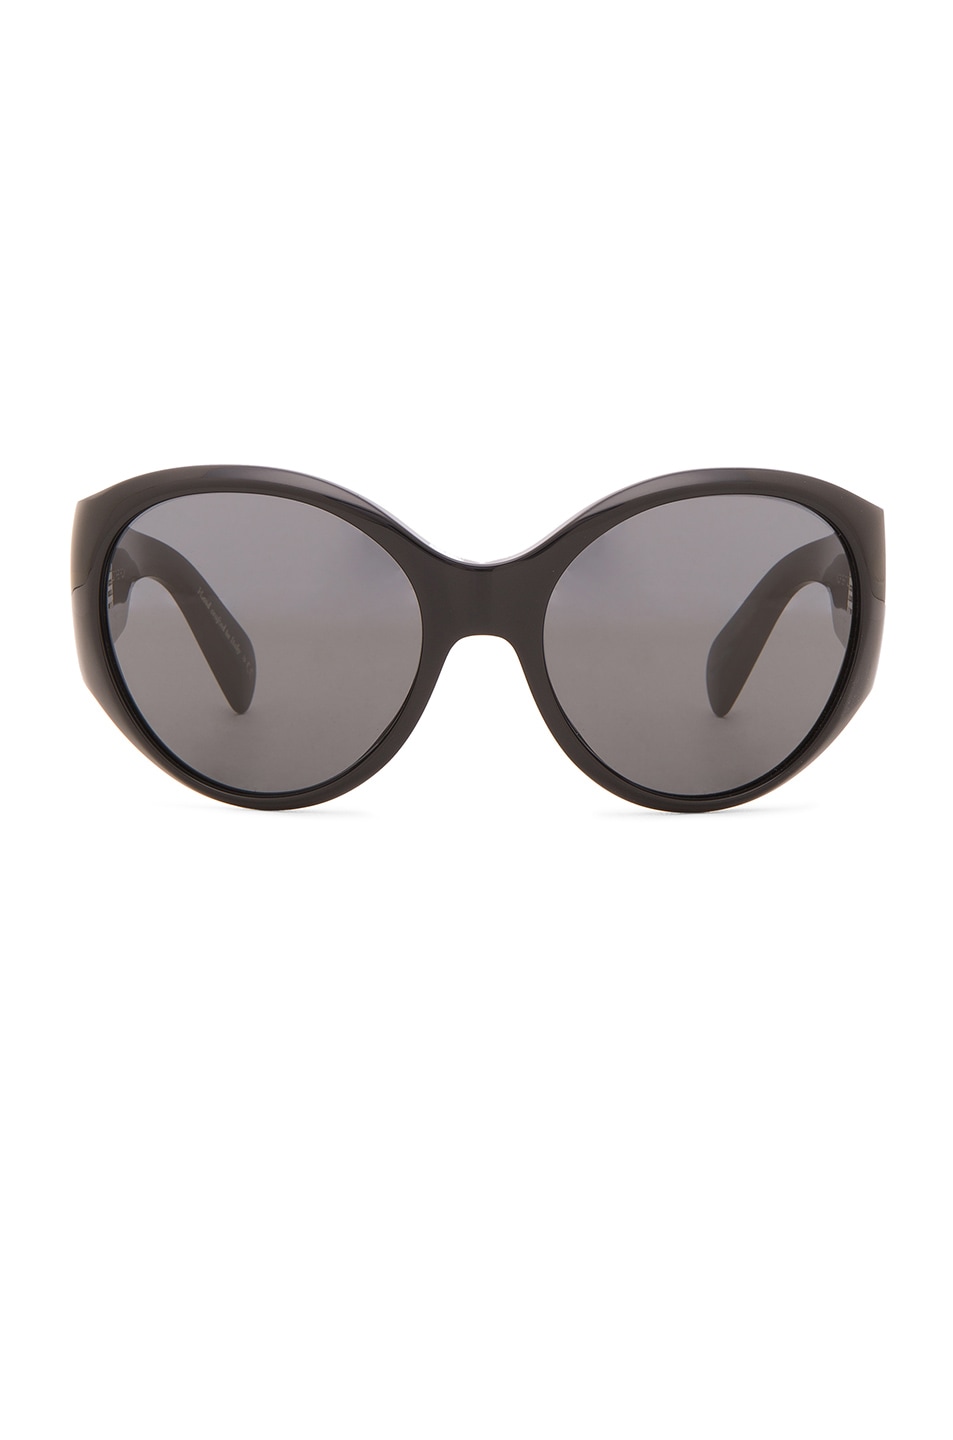 Image 1 of Oliver Peoples The Row Don't Bother Me Sunglasses in Black